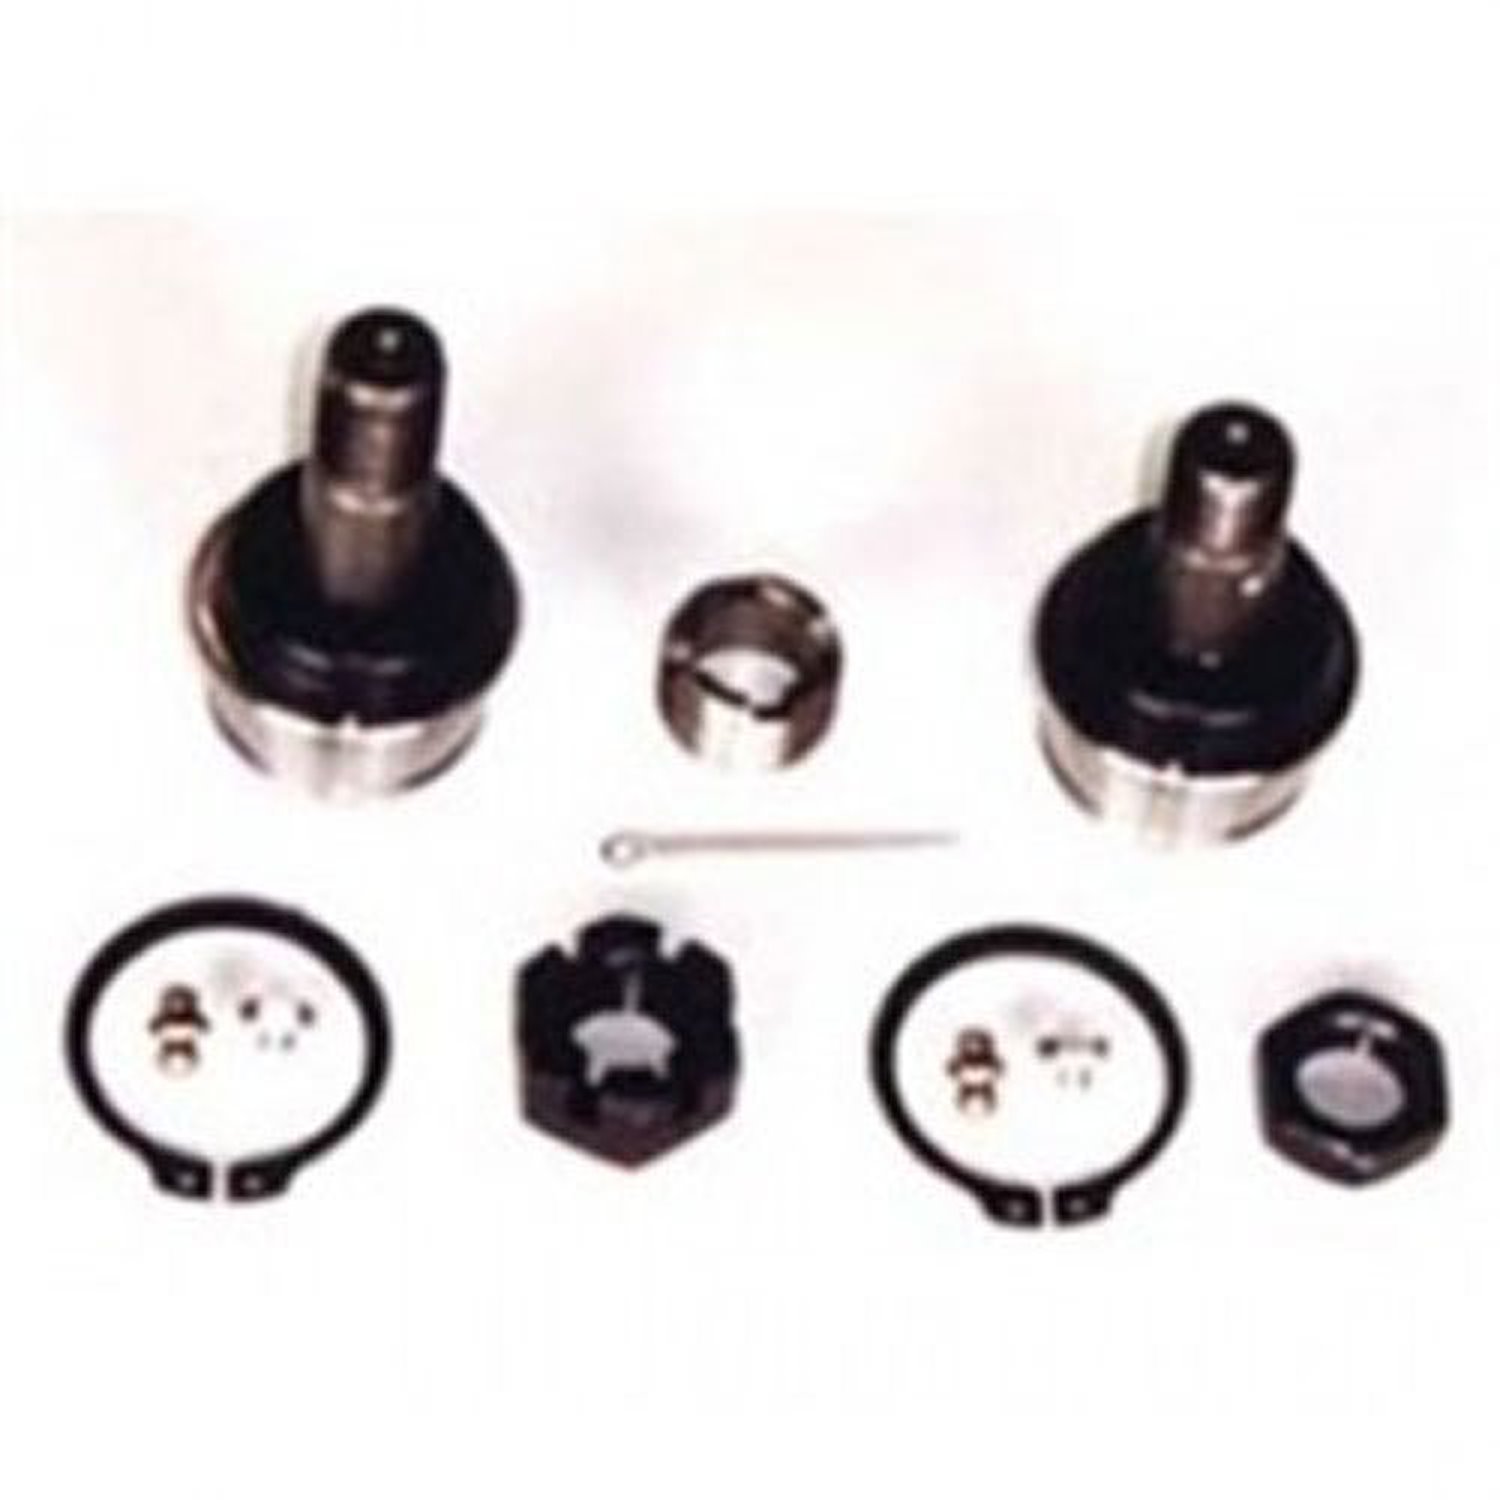 This Ball Joint kit from Omix-ADA fits 72-86 Jeep CJ models. It includes the upper and lower ball jo